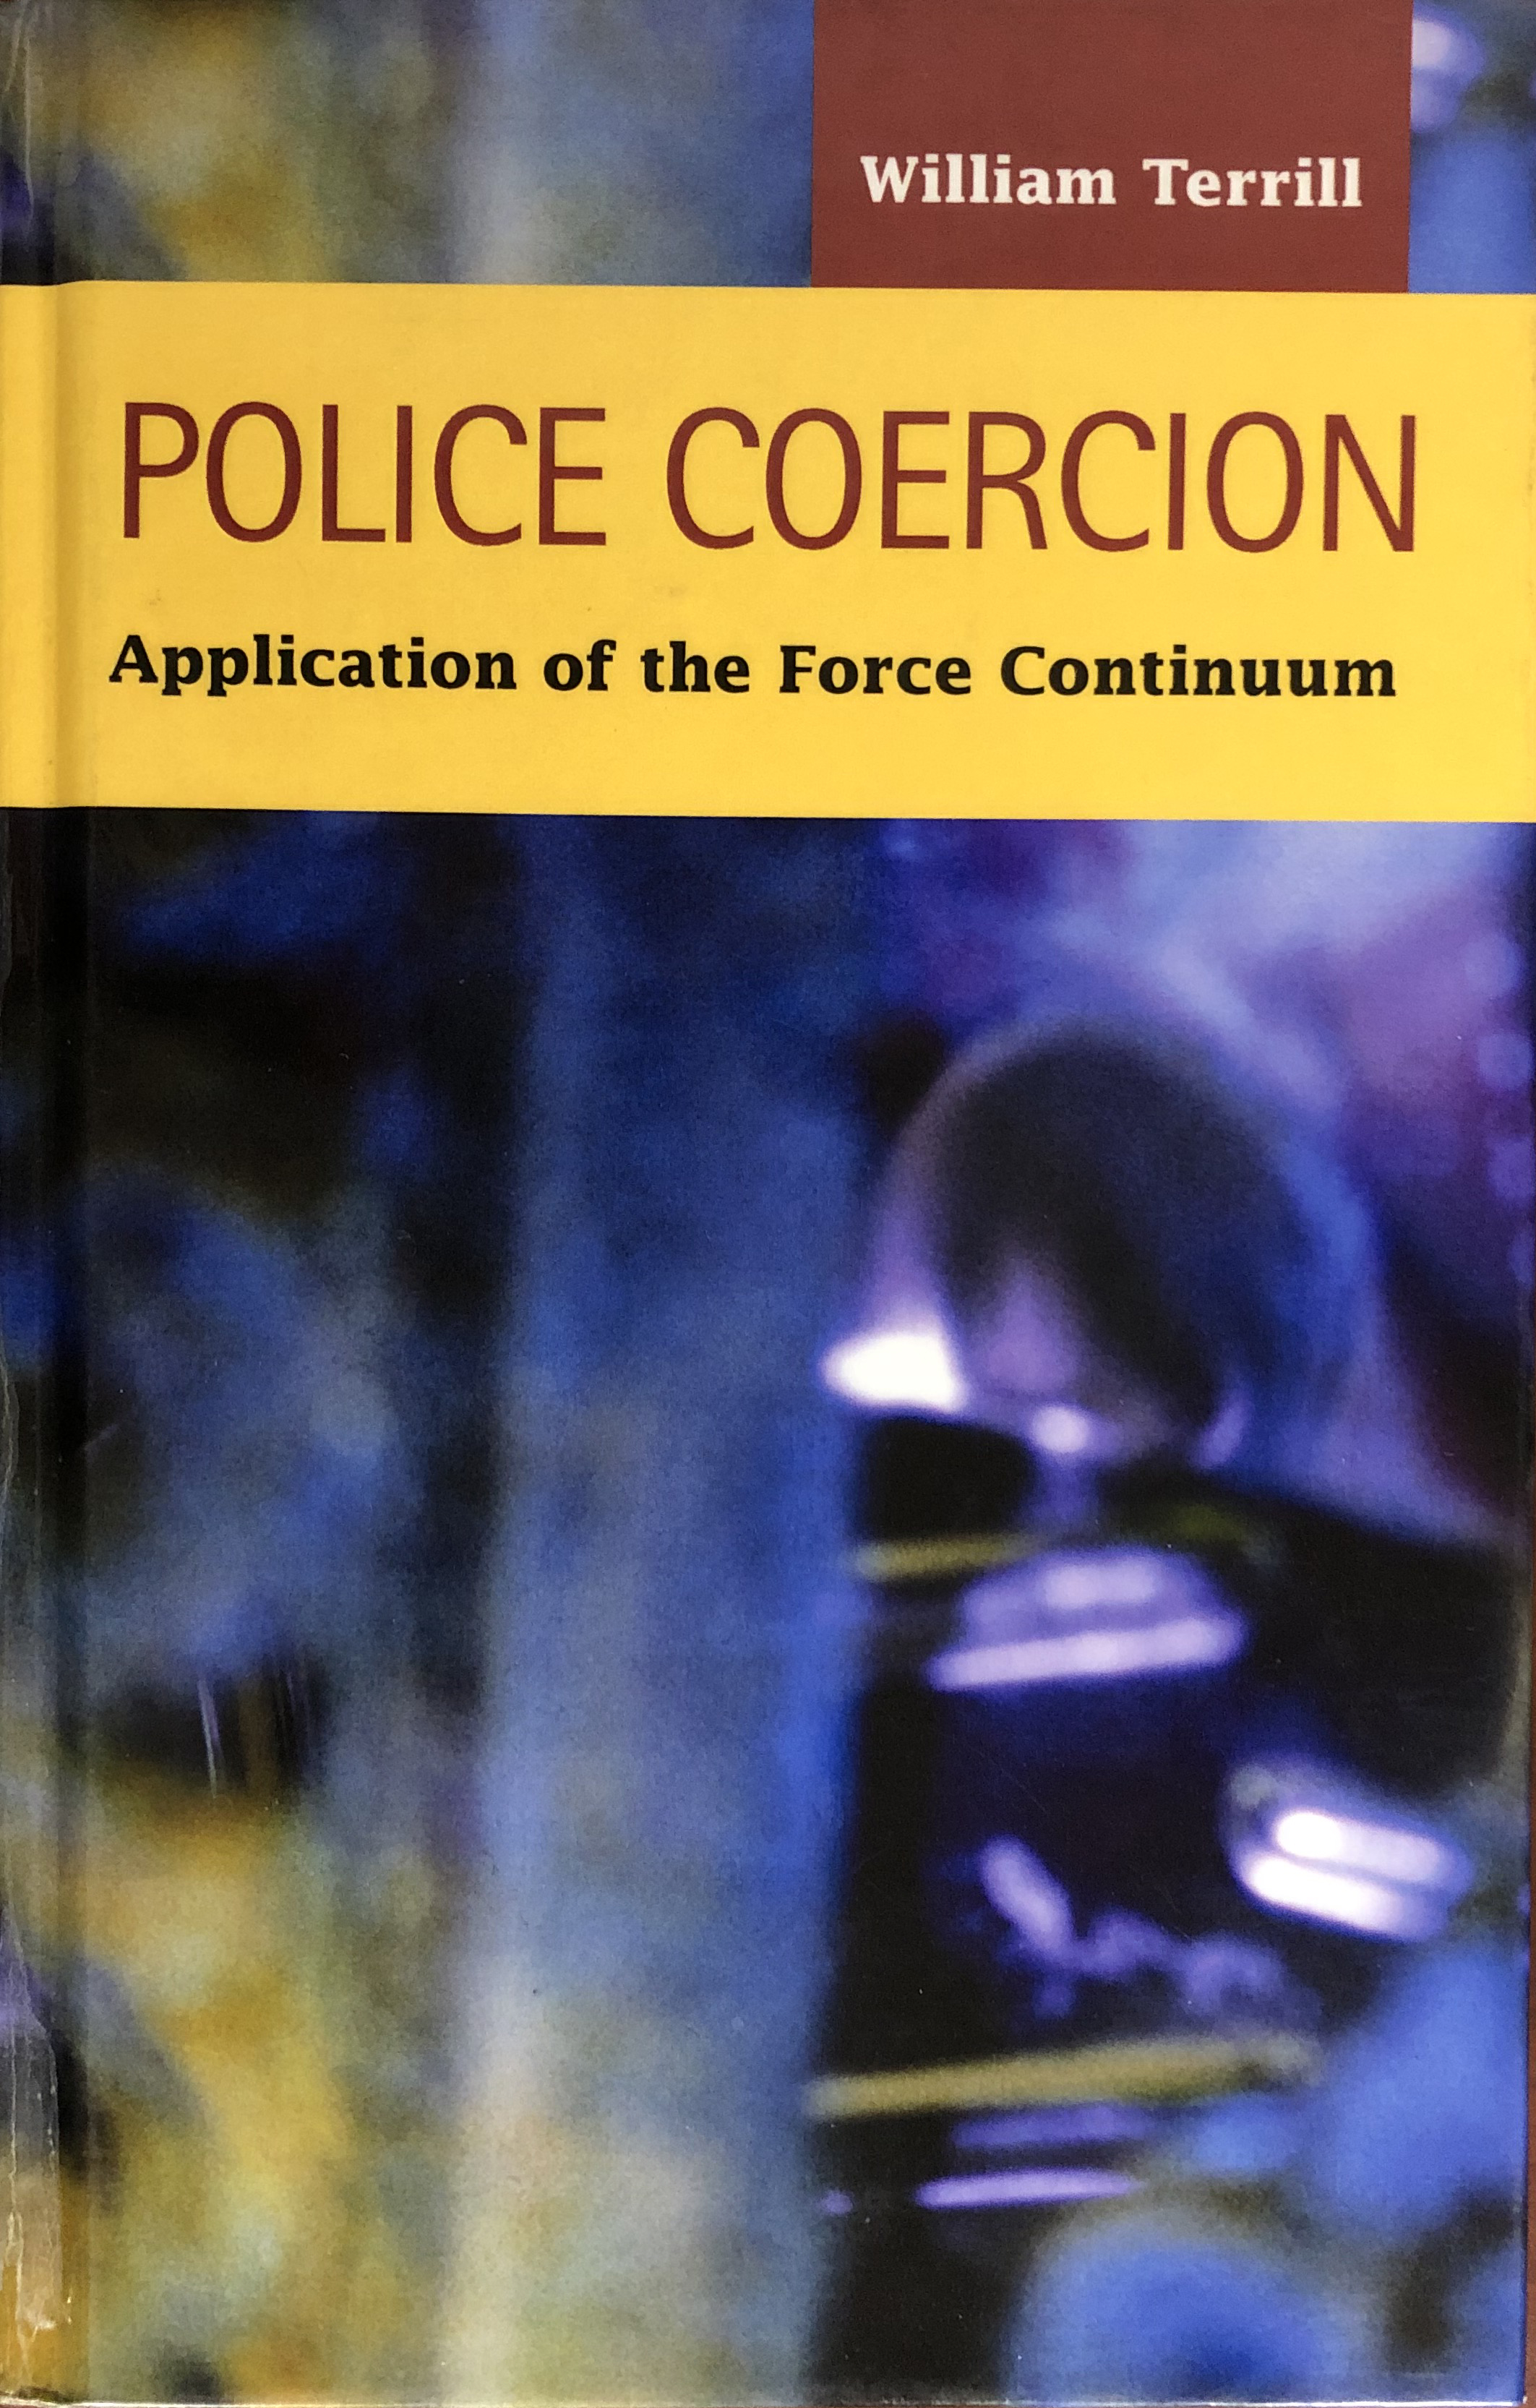 Book cover - Police Coercion: Application of the Force Continuum